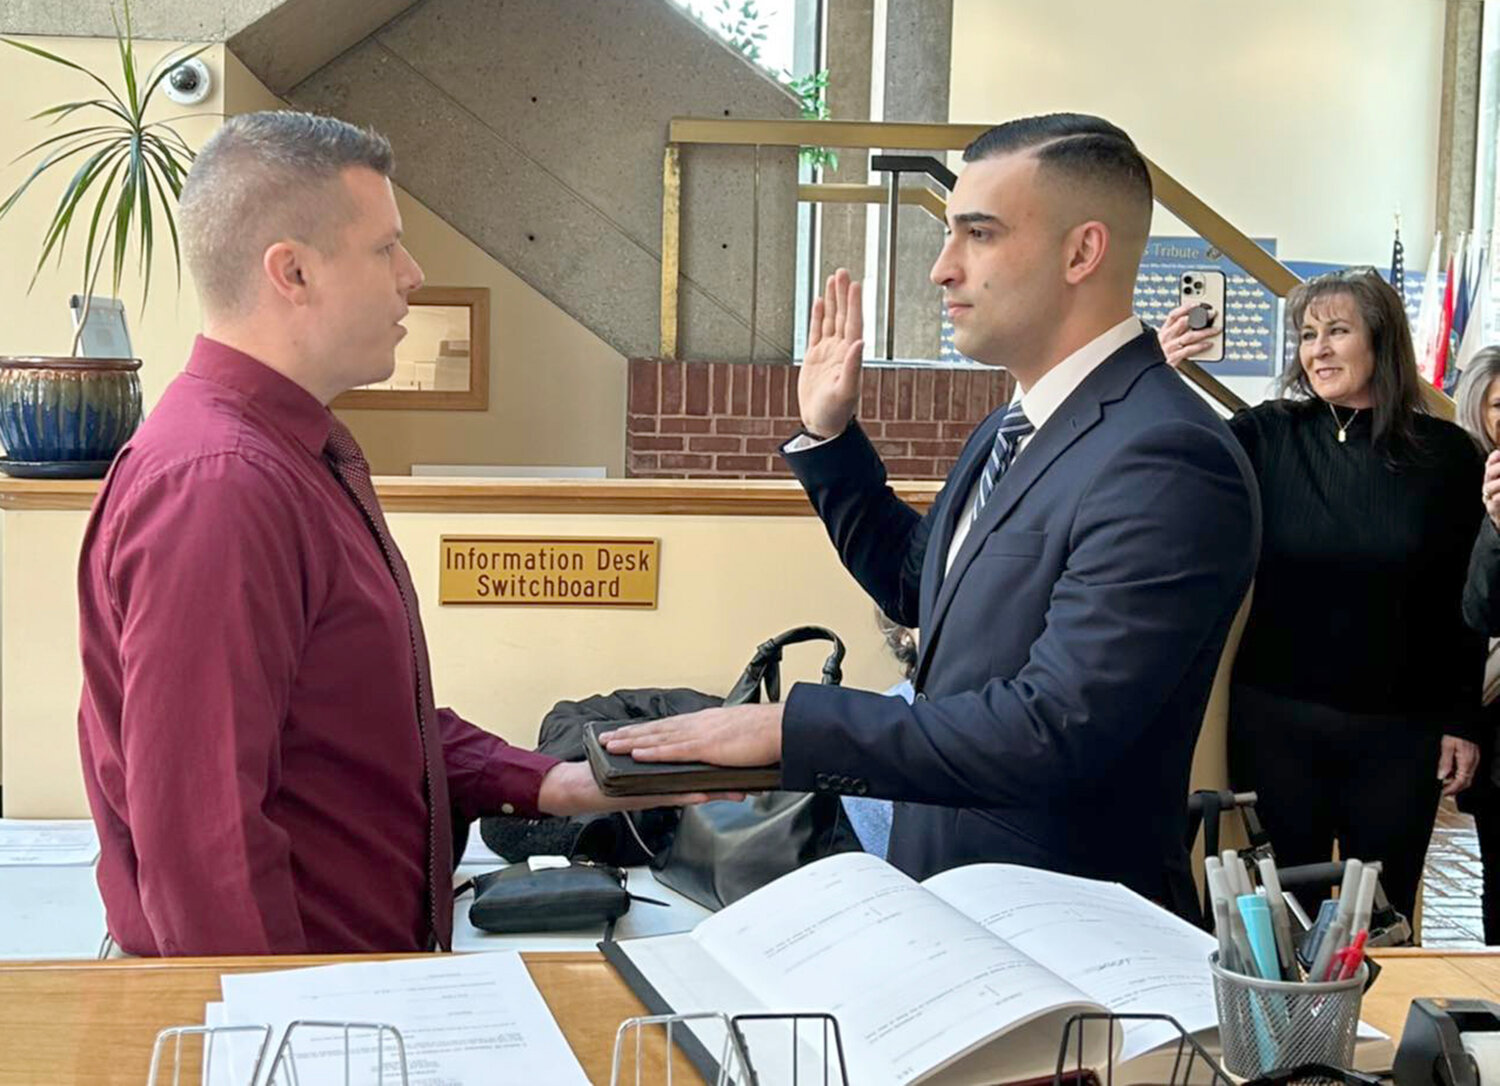 SWEARING IN — New Rome Police Officer Aaron Alshaman is sworn into service at Rome City Hall this week. Alshaman transferred from the Oneida County Sheriff’s Office with three years of experience in law enforcement.